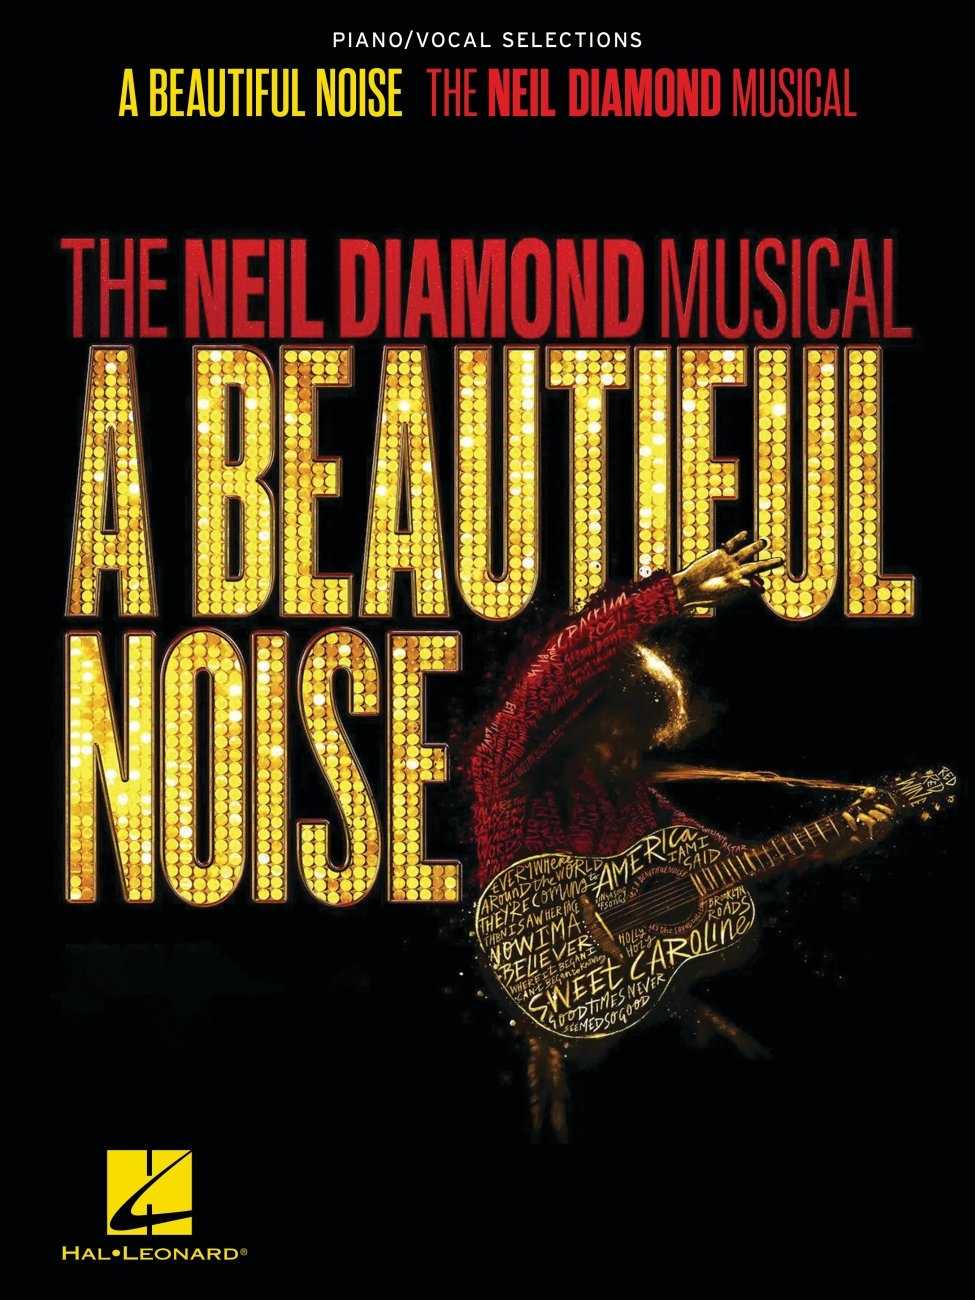 A Beautiful Noise - The Neil Diamond Musical Piano/Vocal Selections